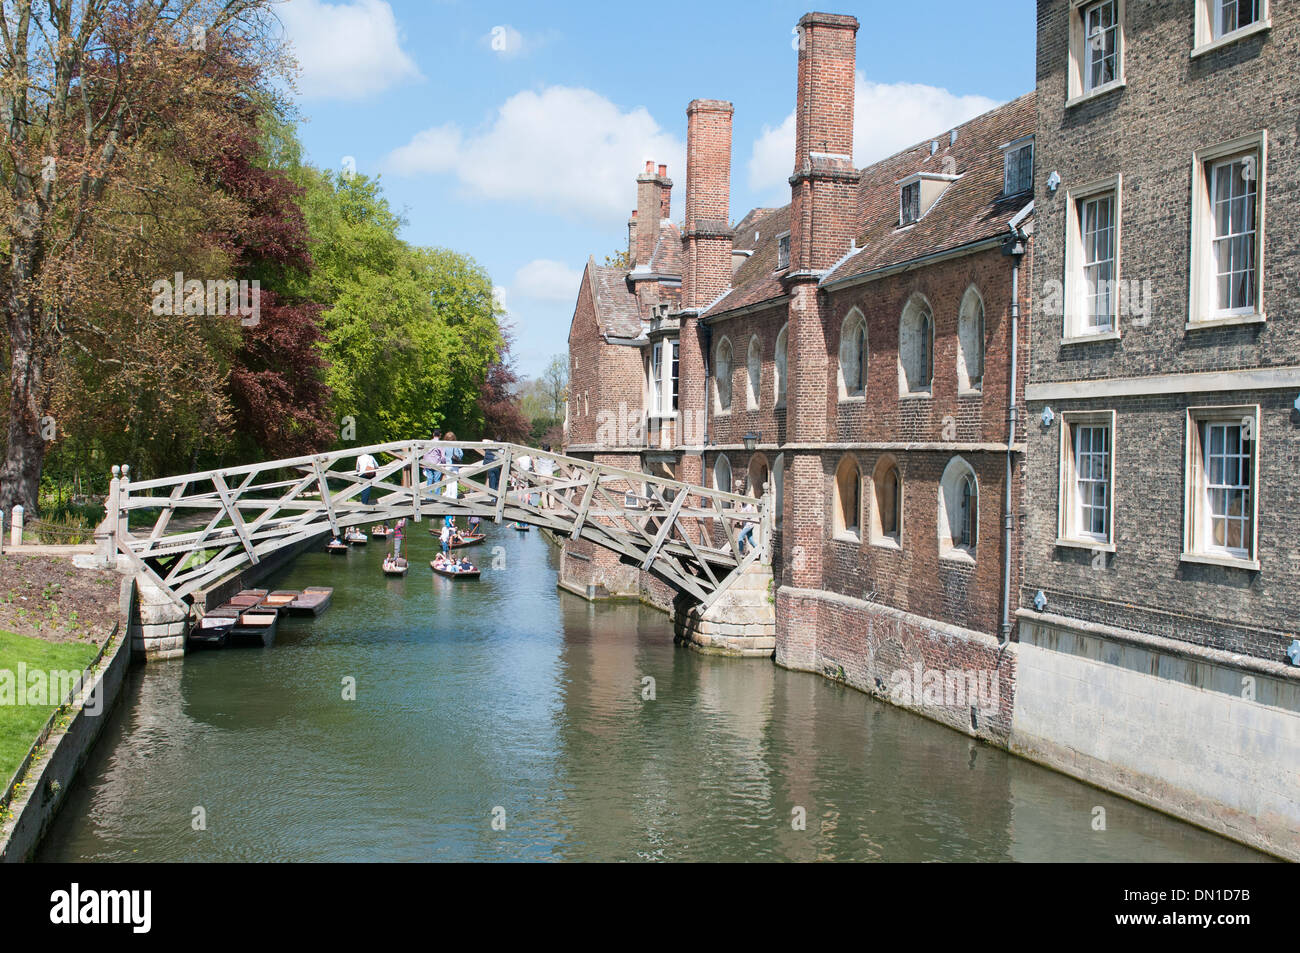 The Mathematical bridge, built in 1749 by James Essex that spans the river Cam in Cambridge, England, UK Stock Photo